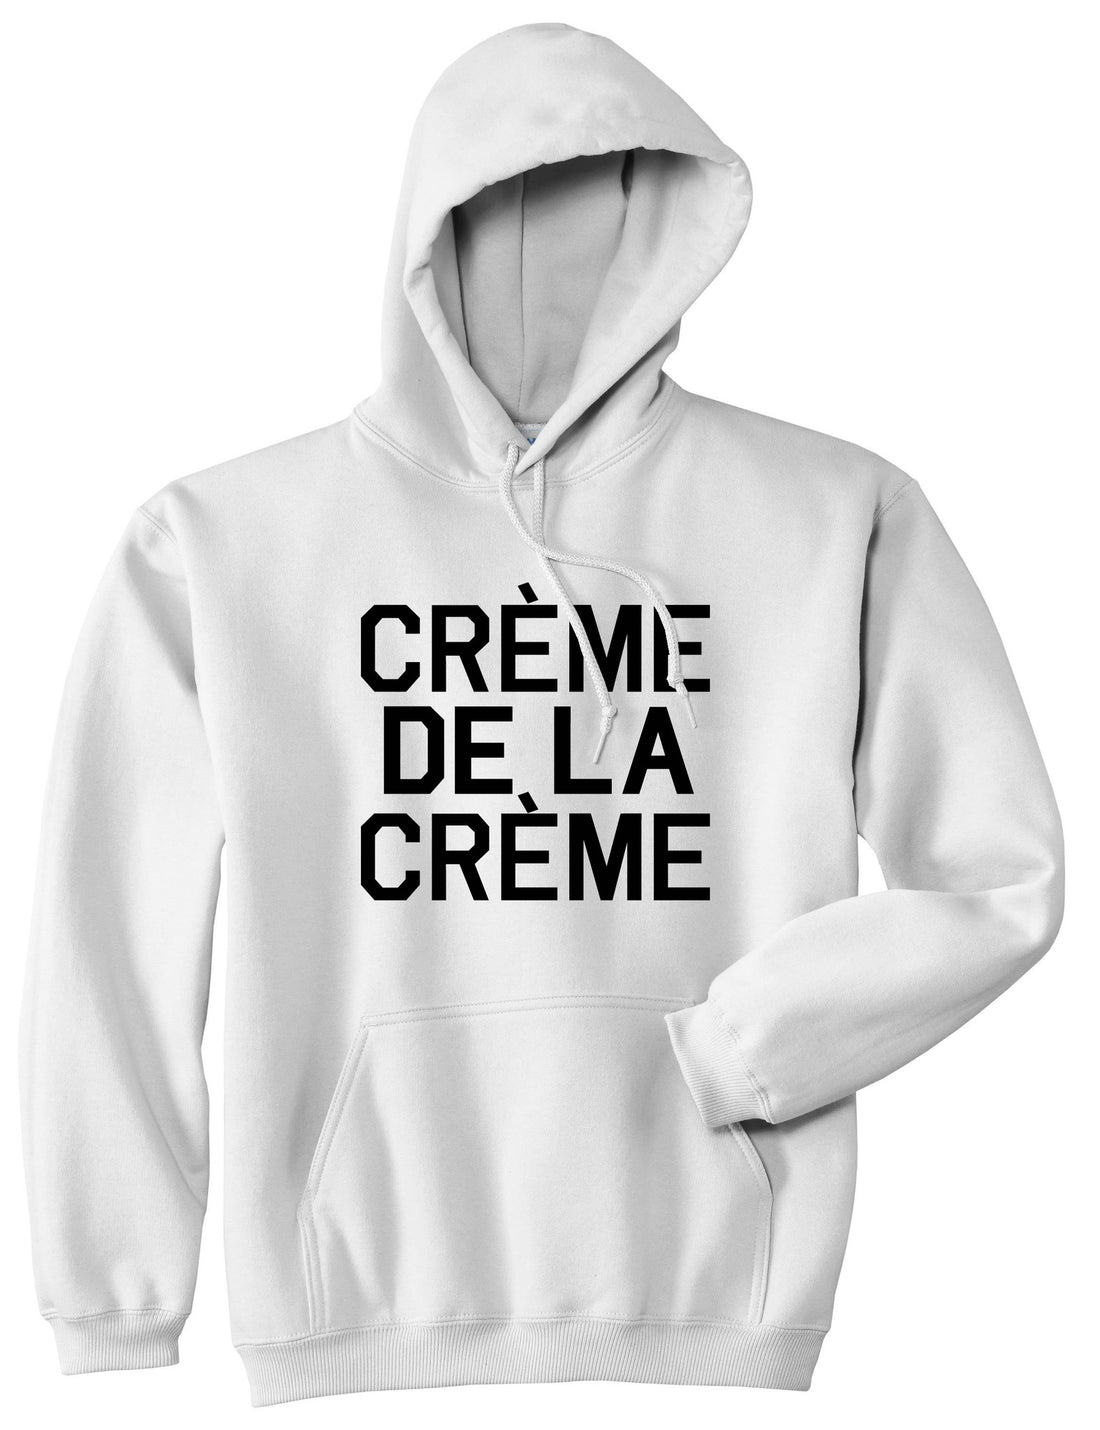 Creme De La Creme Celebrity Fashion Crop Boys Kids Pullover Hoodie Hoody in White by Kings Of NY